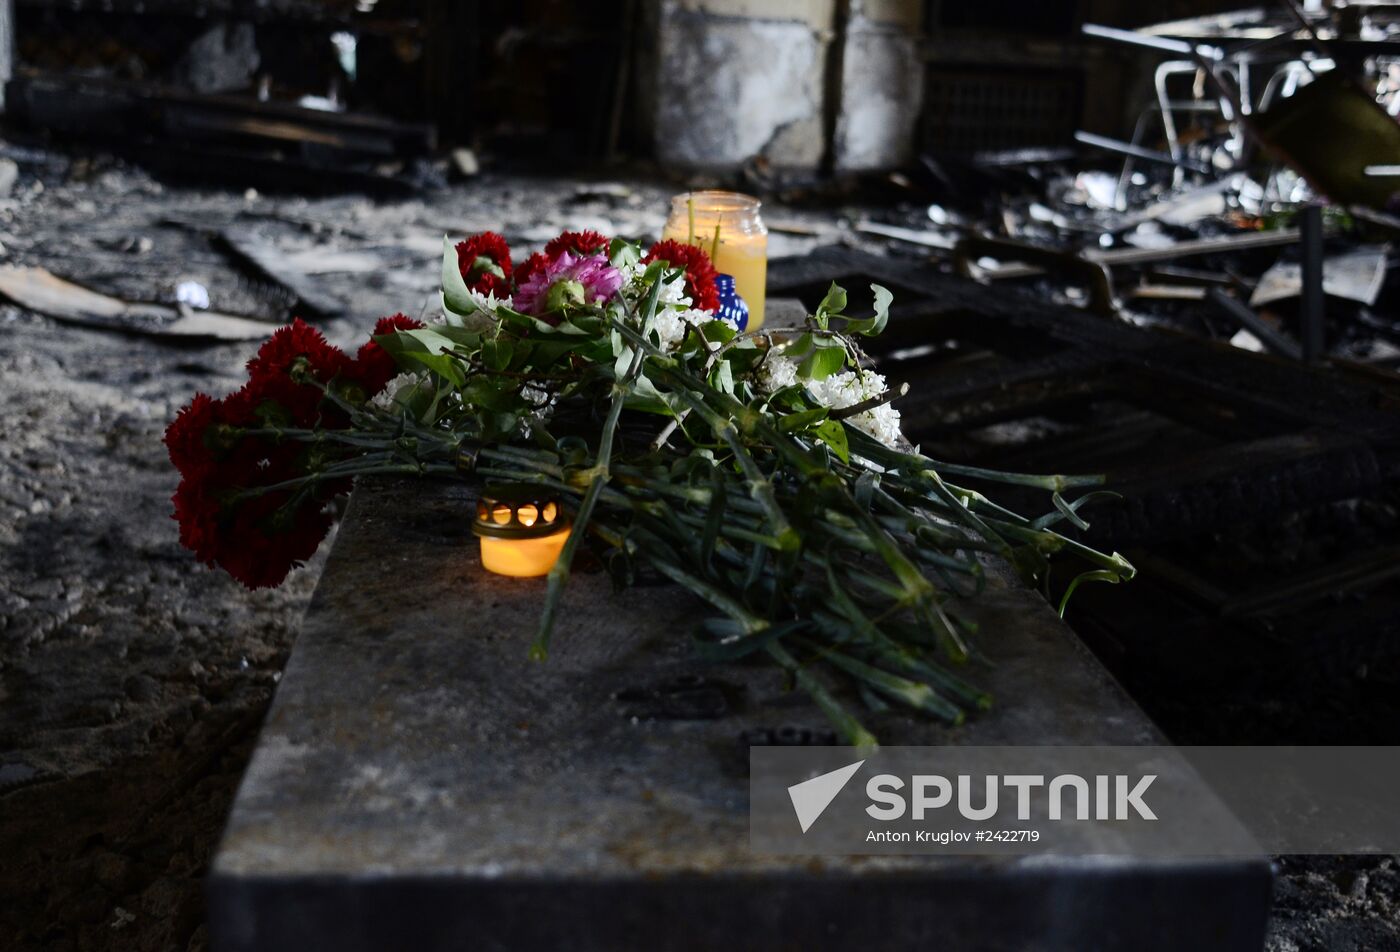 Odessa residents bring flowers in memory of those killed in fire in House of Trade Unions